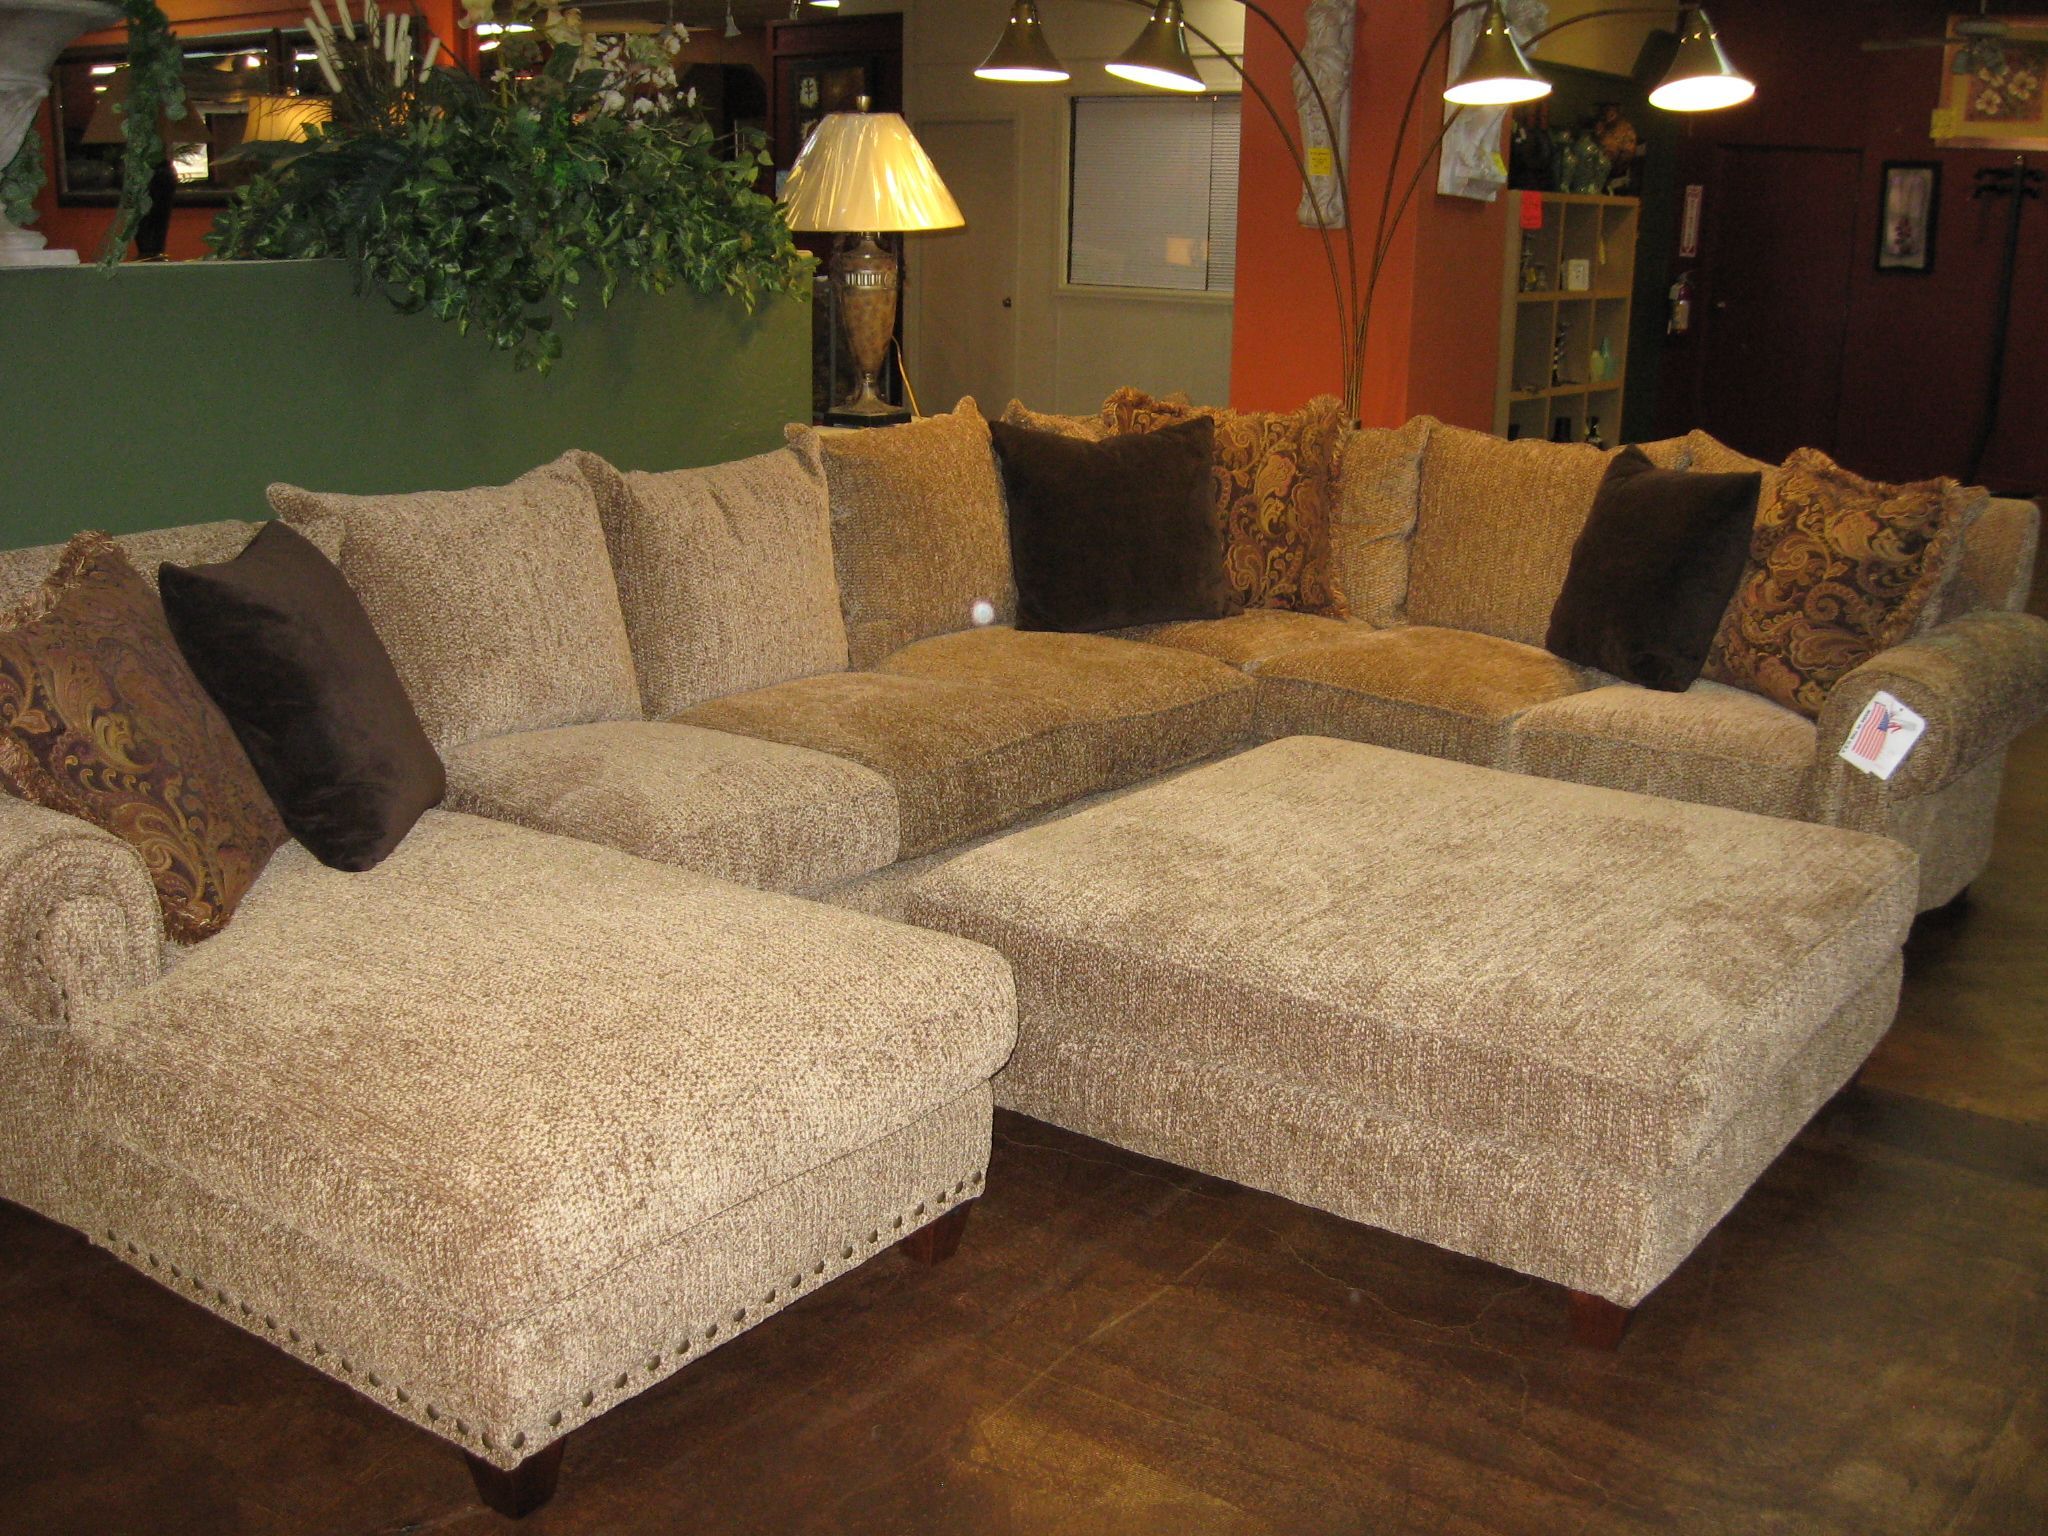 Robert Michael Rocky Mountain Sofa & Sectionals Direct Outlet | Large Throughout U Shaped Couches In Beige (View 2 of 20)